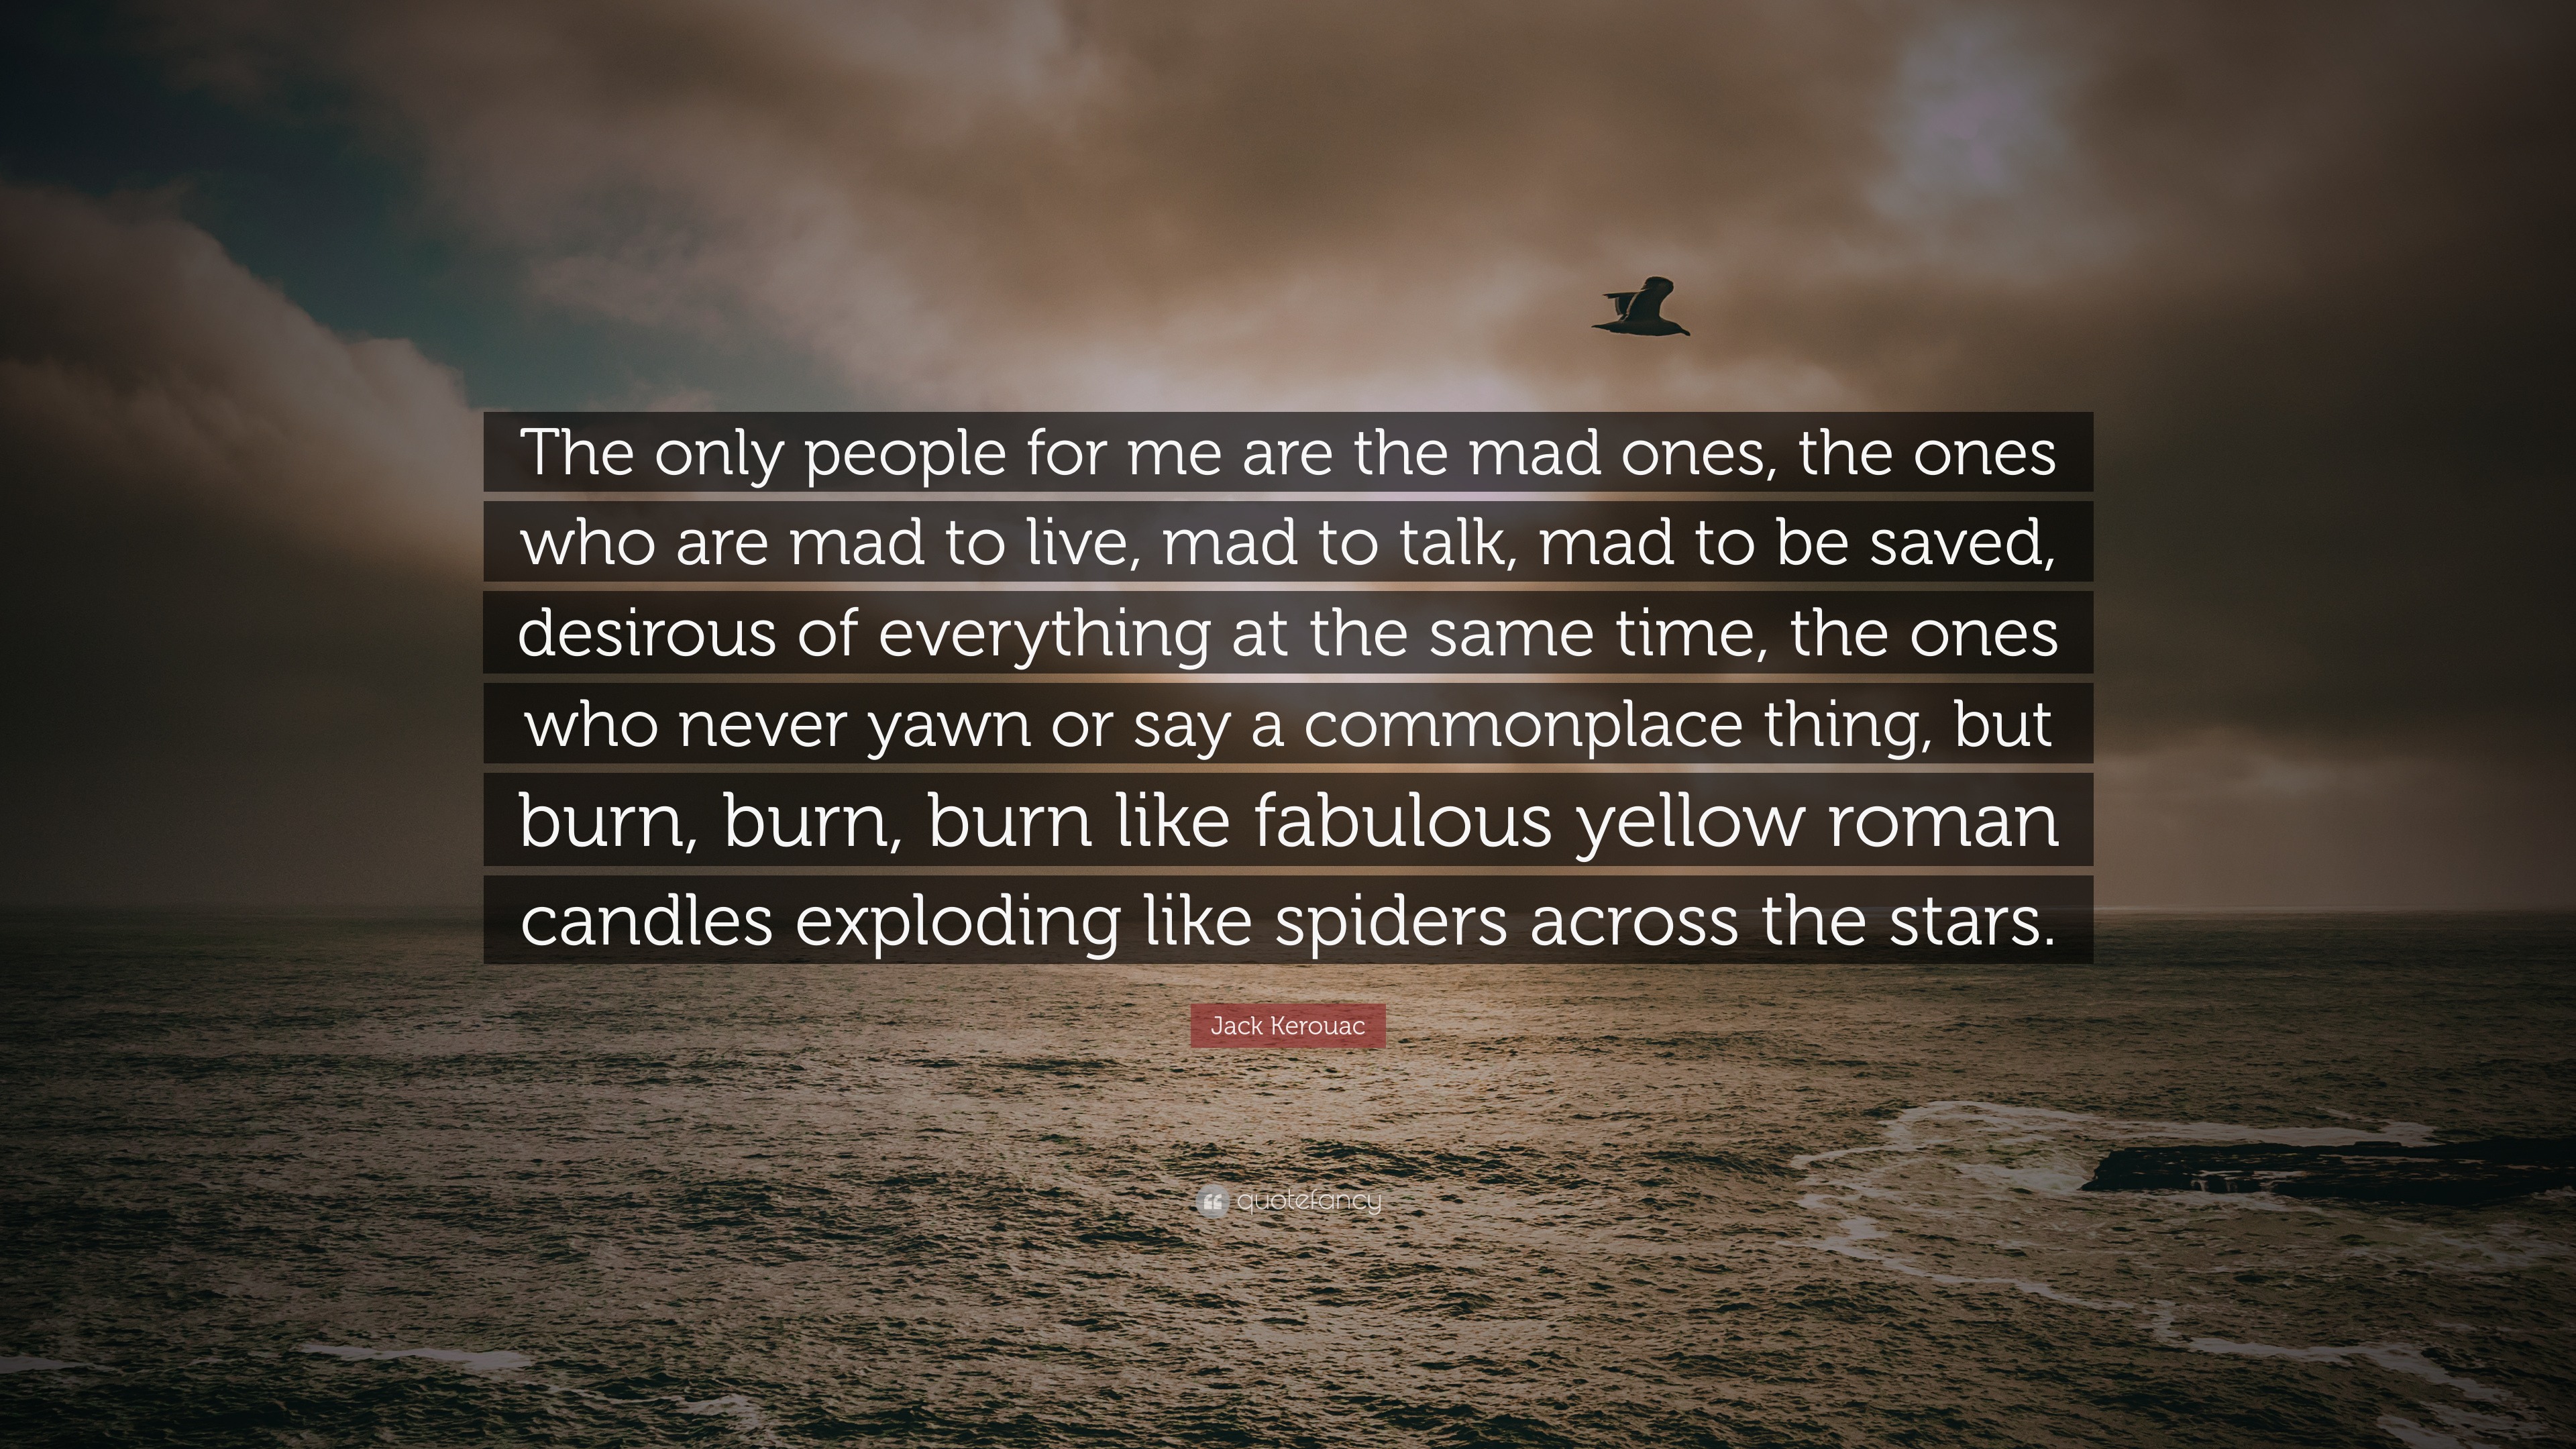 Jack Kerouac Quote: “The only people for me are the mad ones, the ones